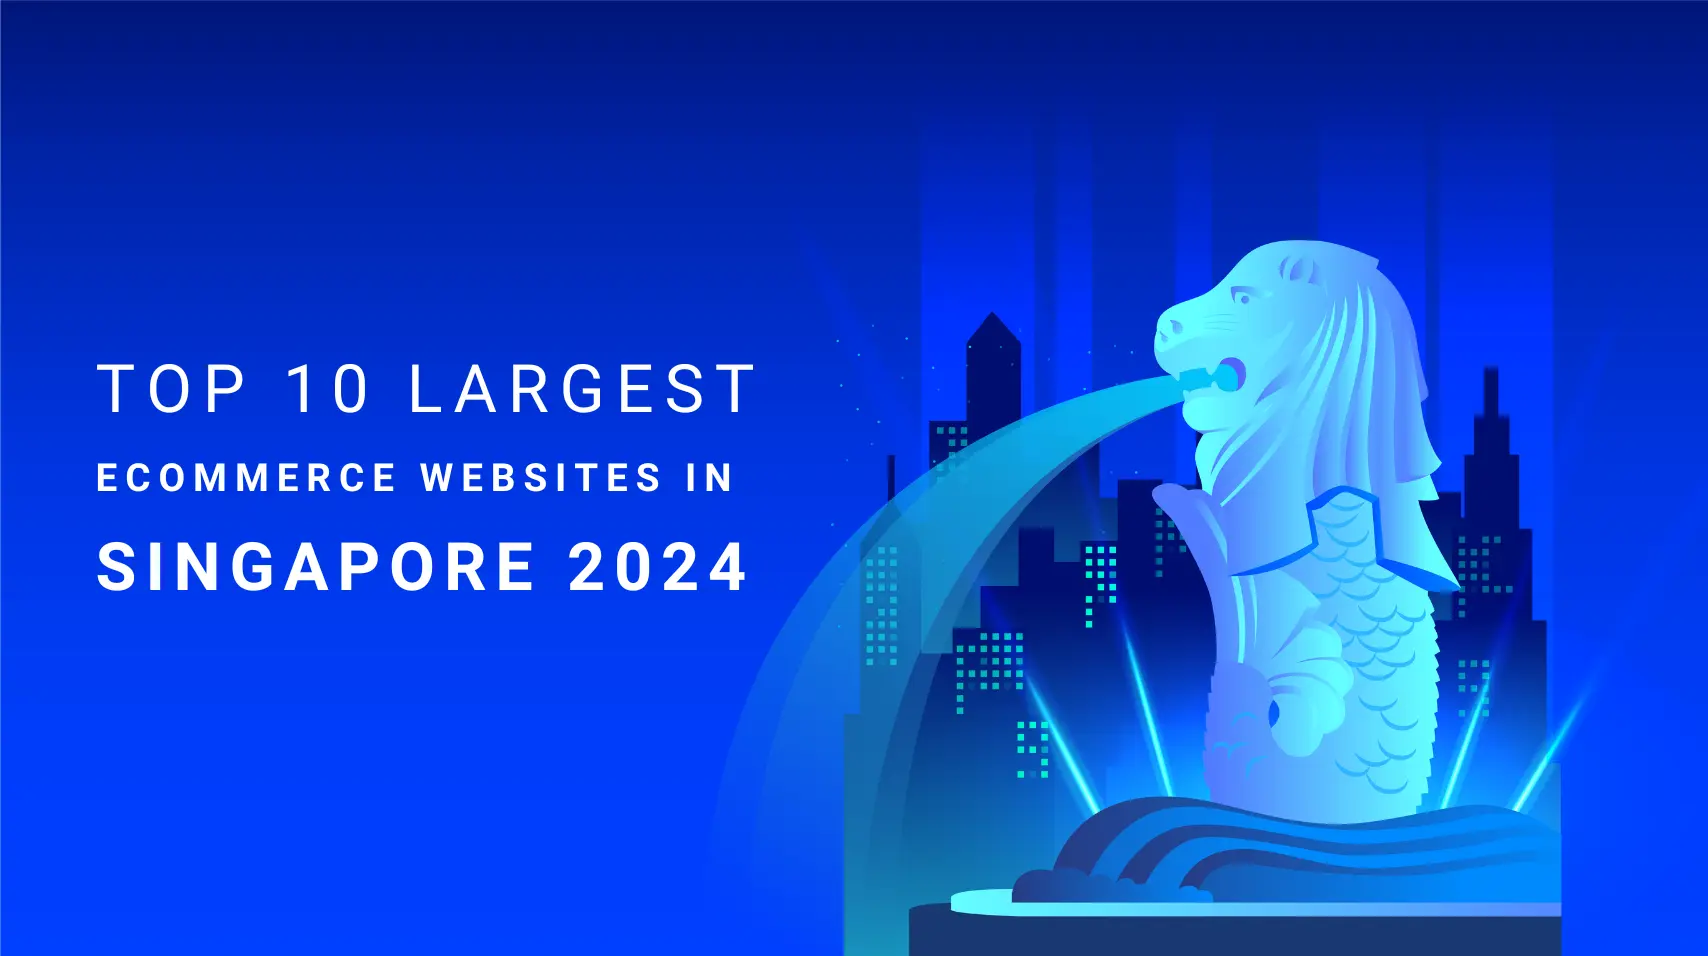 Top 10 Largest eCommerce Websites in Singapore 2024